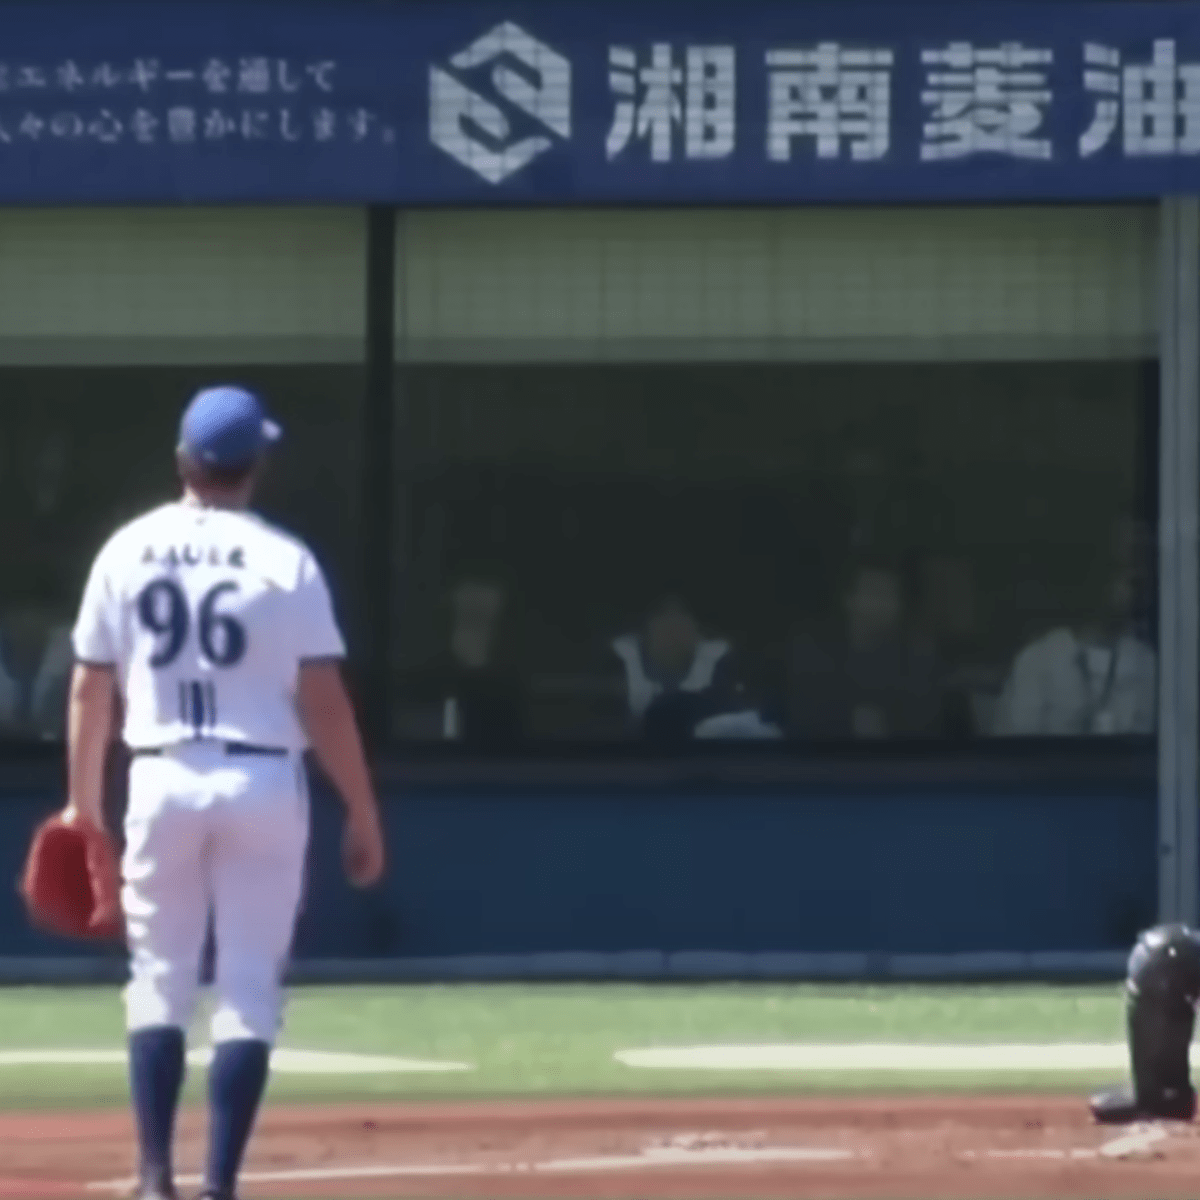 Trevor Bauer gave up 7 runs in 2 innings in Japan as he continues